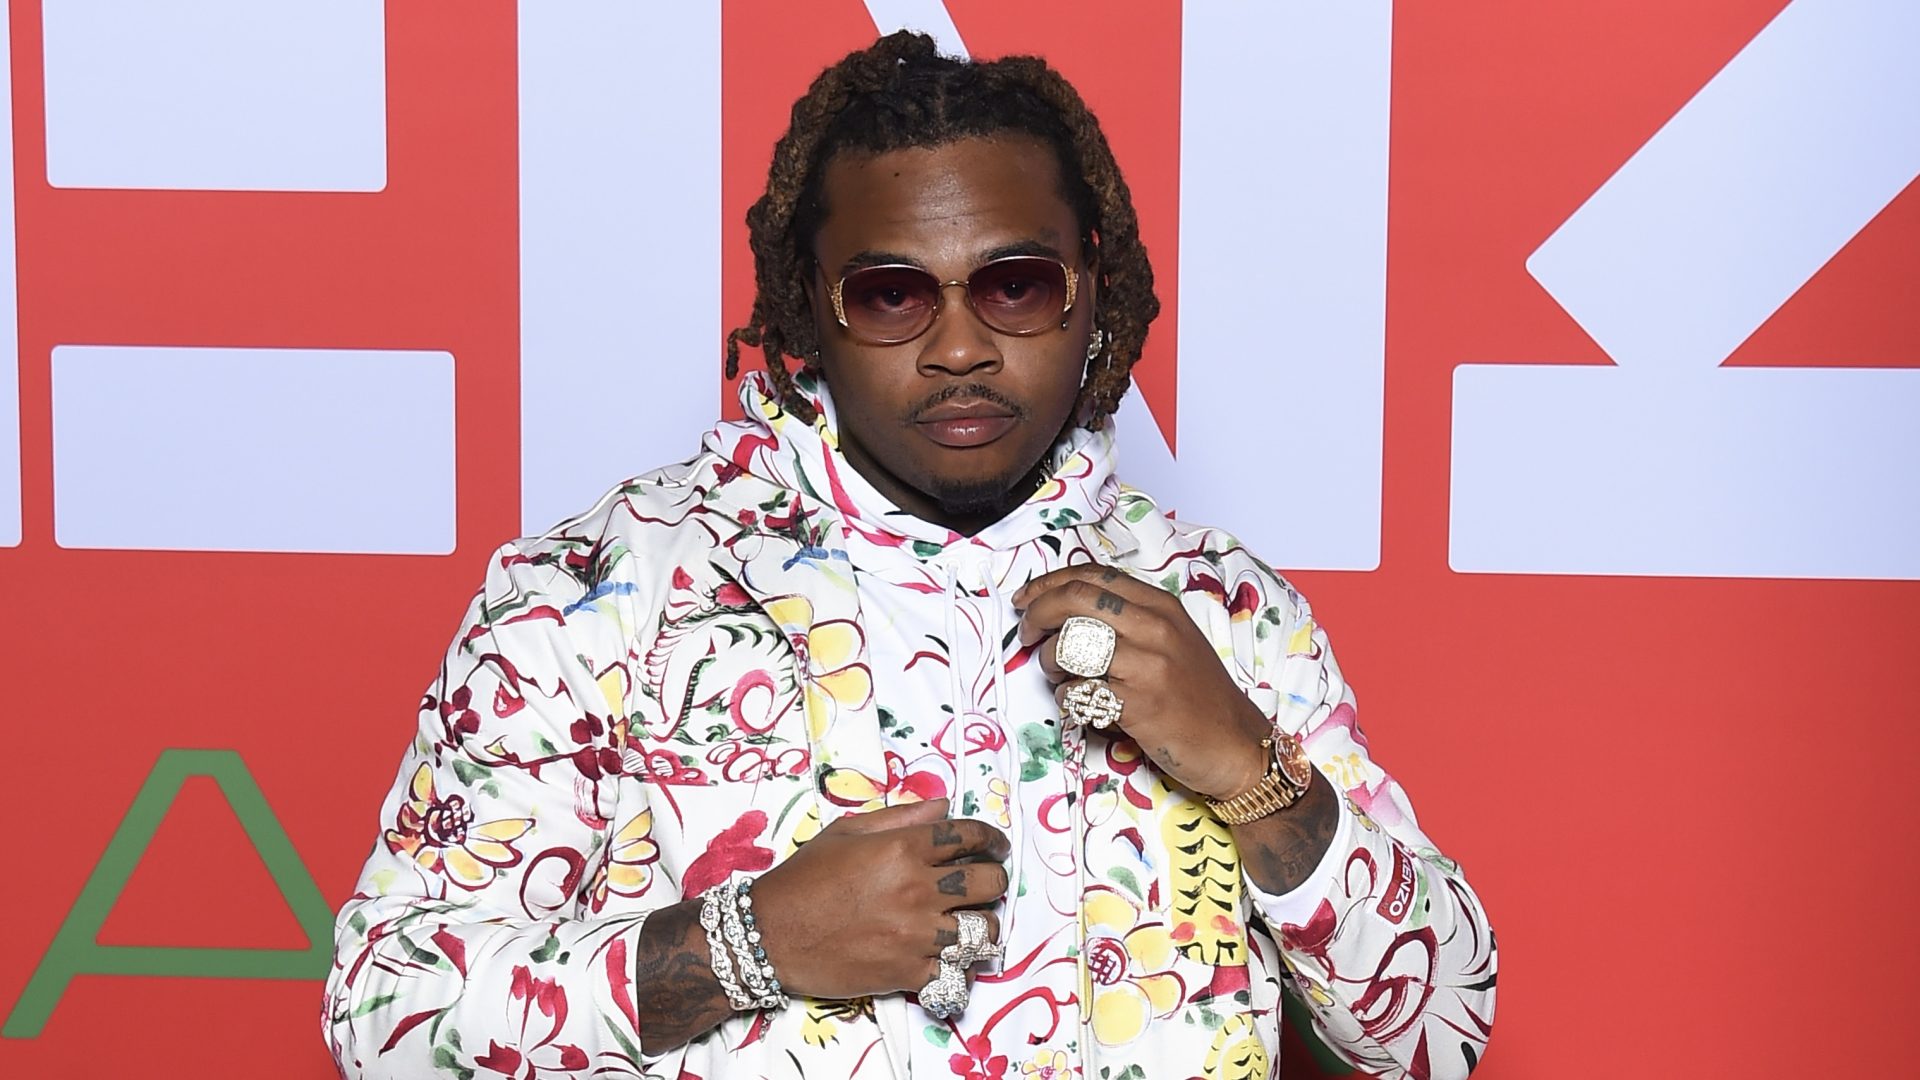 (WATCH) Gunna Blasts Snitching Accusations In First Music Video Following YSL Plea Deal: 'Never Gave No Statement'